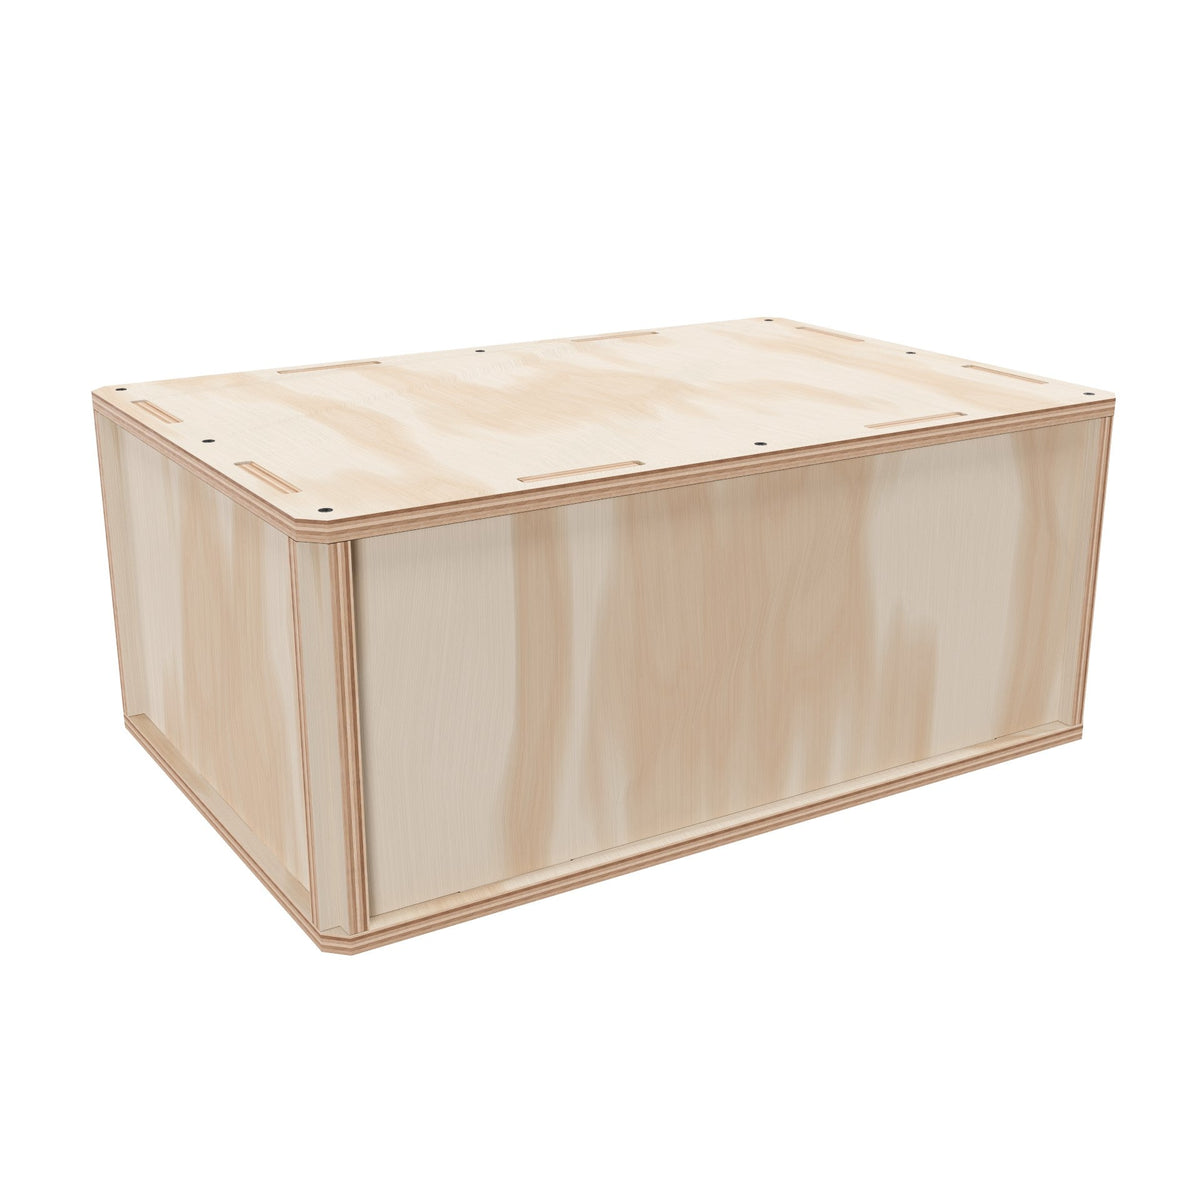 Plywood Shipping Crate 24x16x10